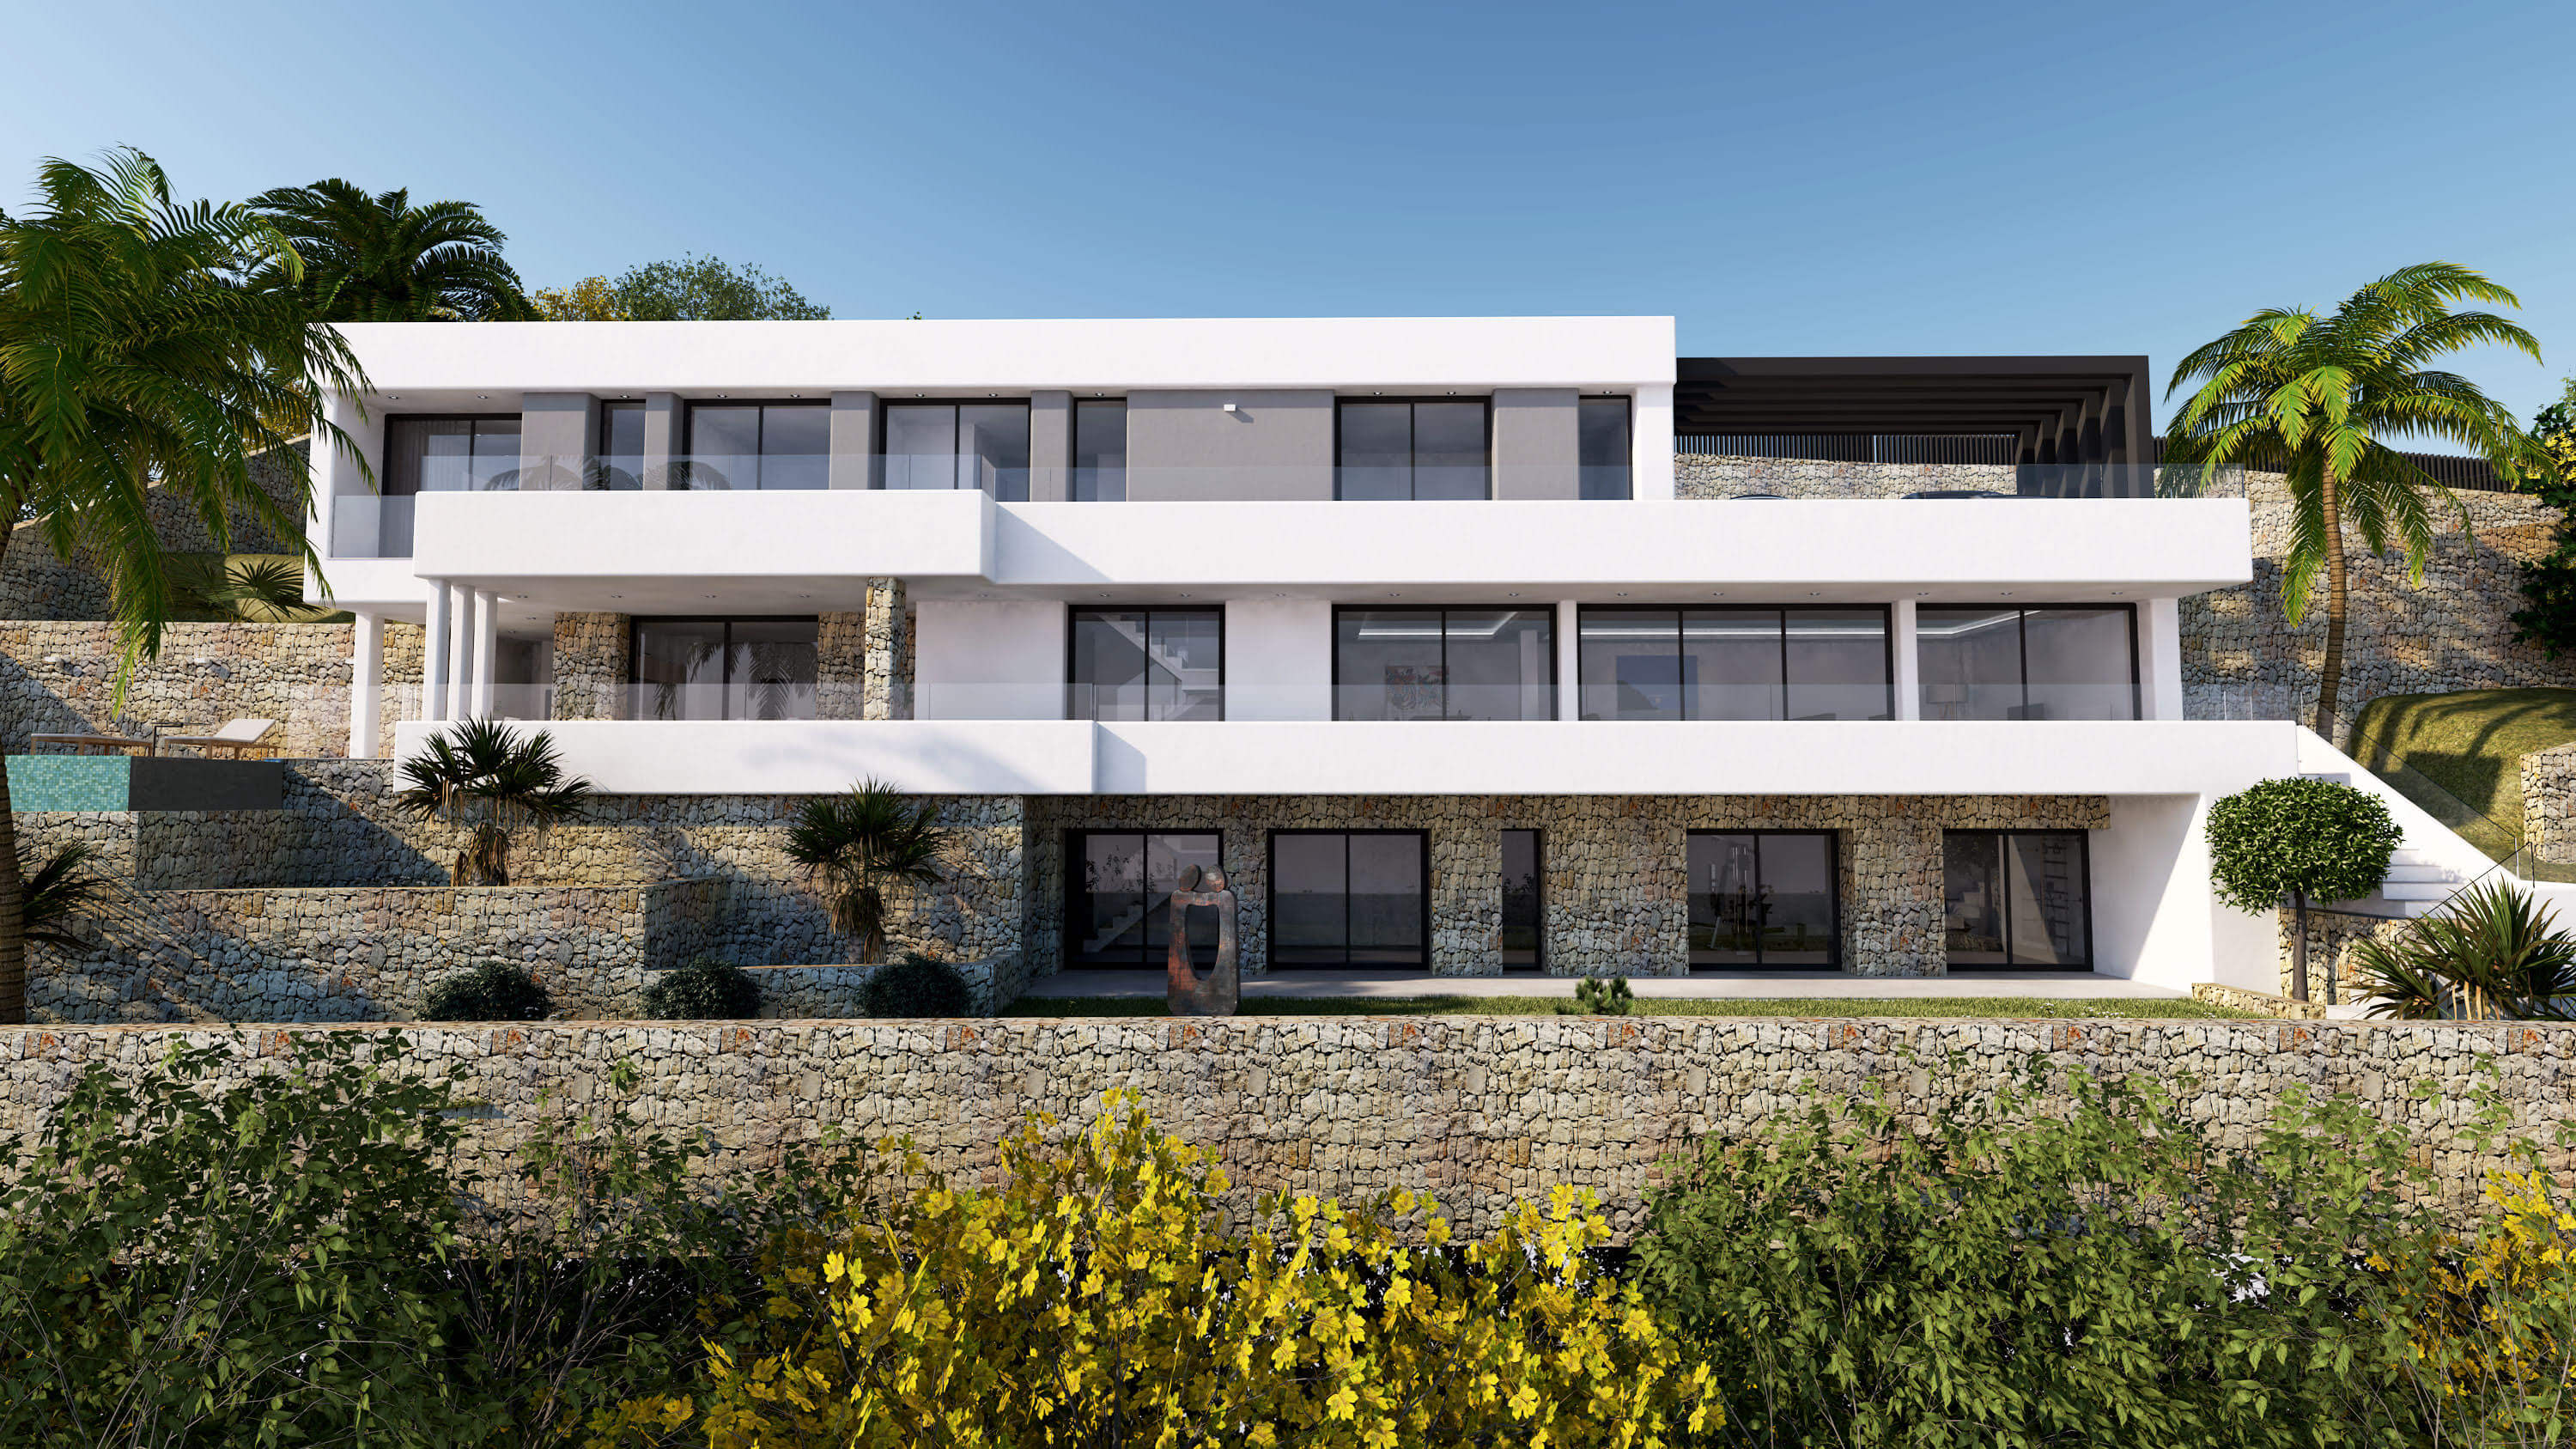 New villa with spectacular panorama under construction